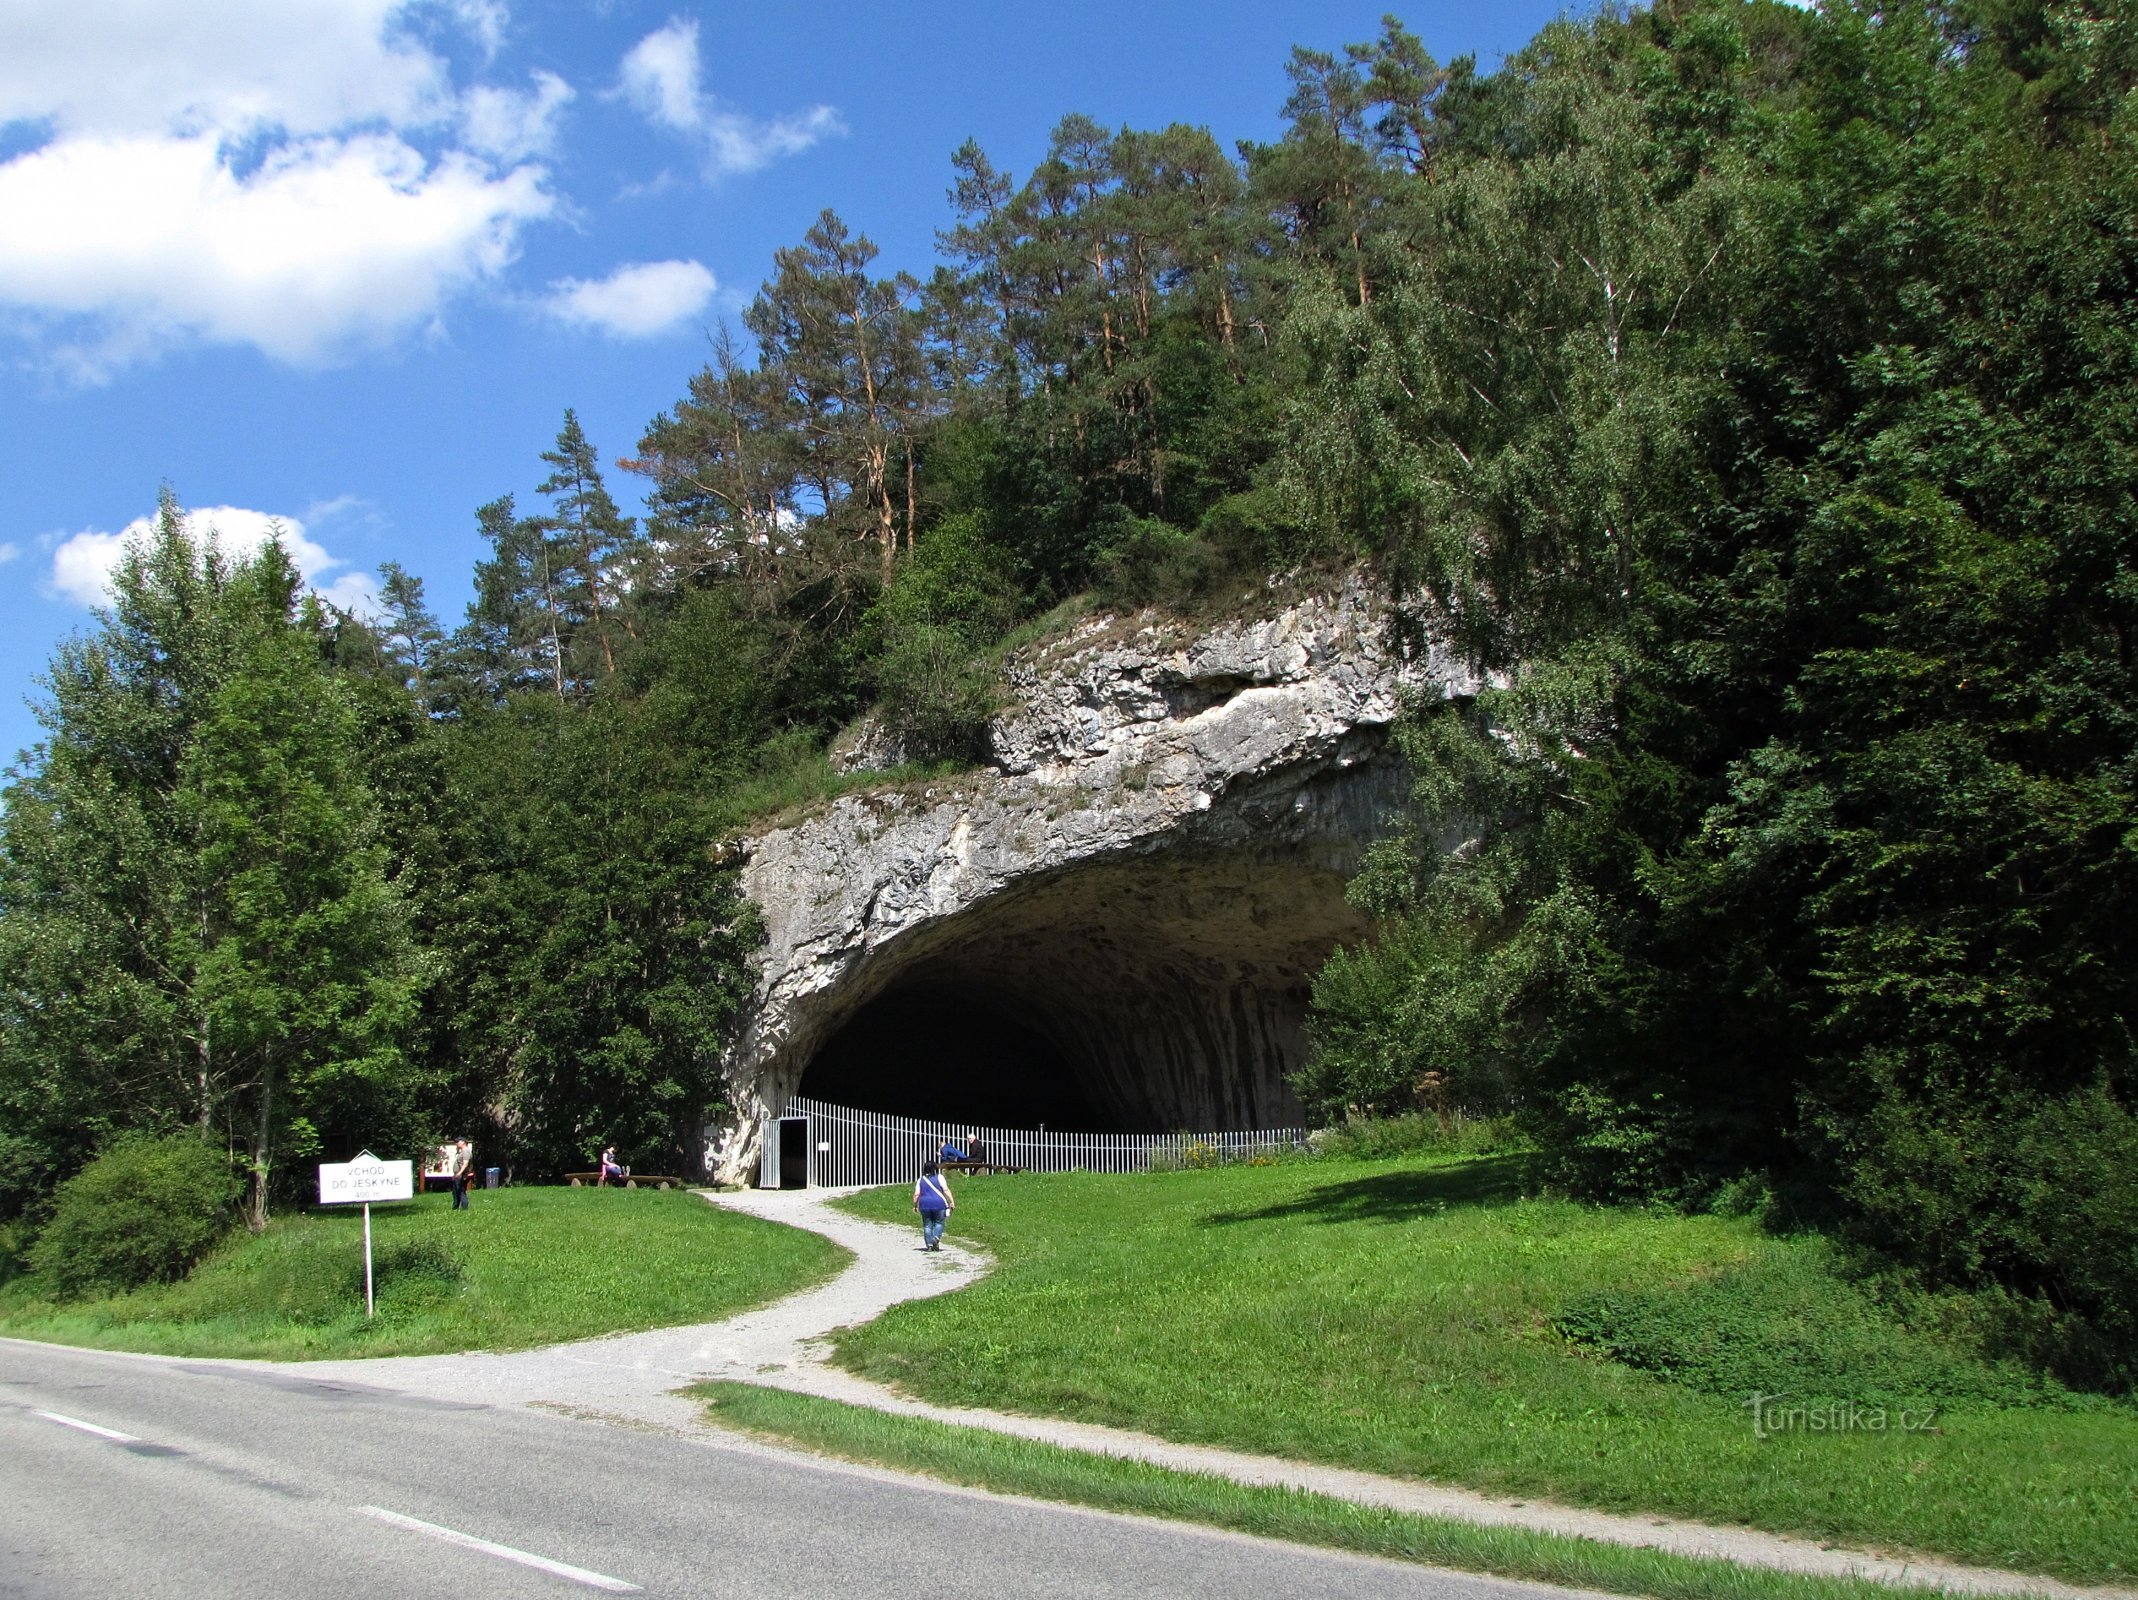 Cave Shed